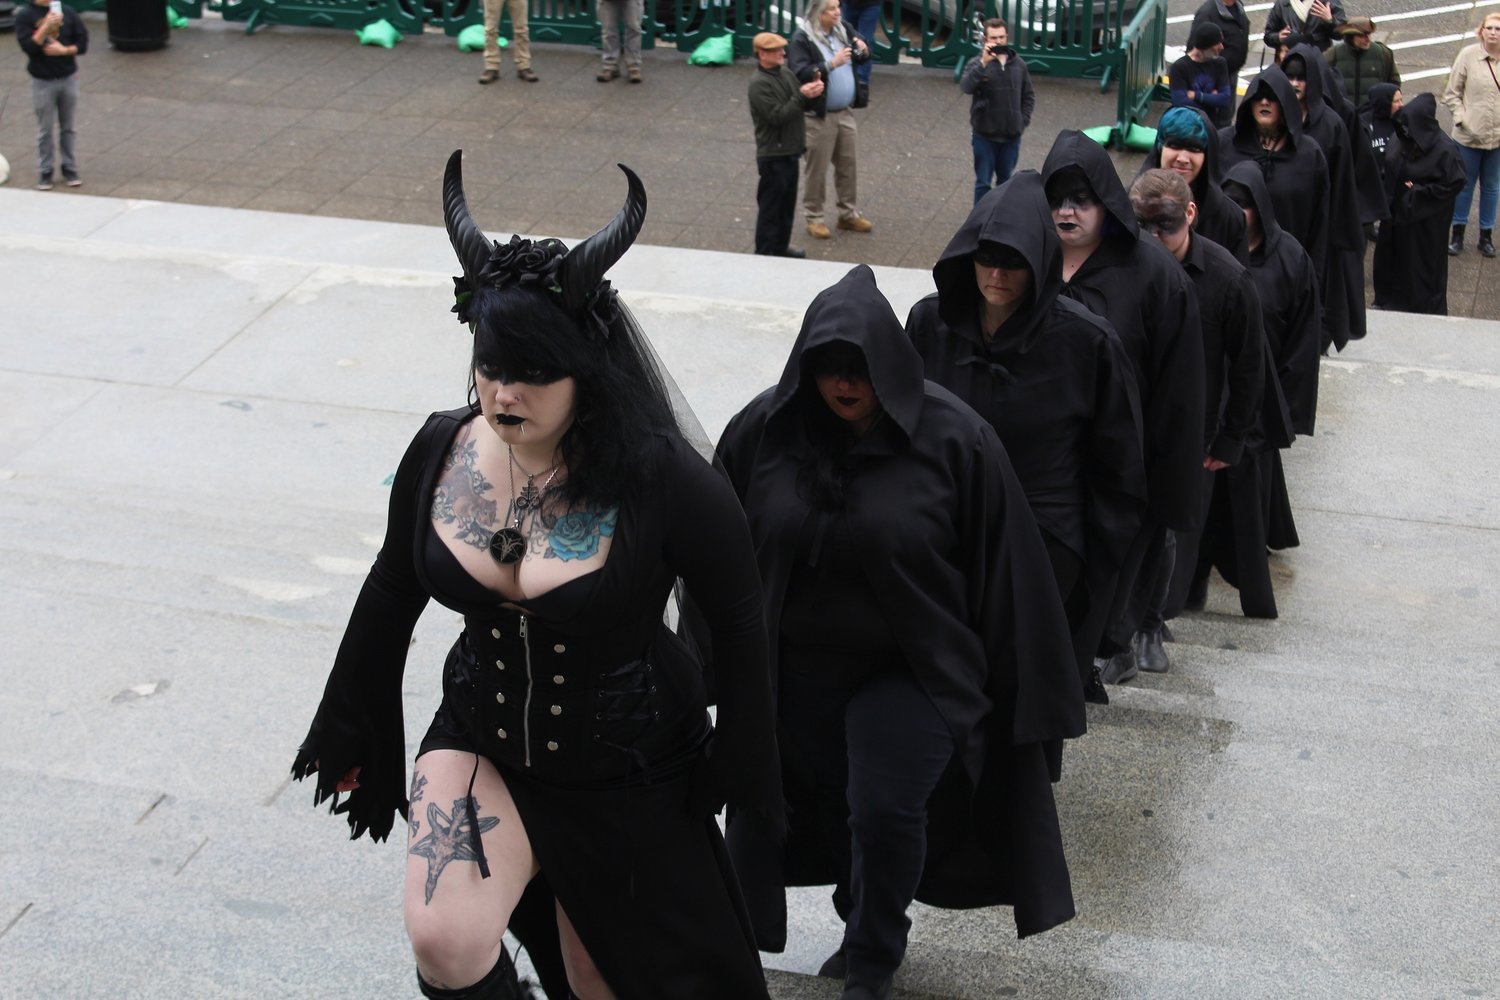 Angel, who goes by one name and is the ritual guild leader for the Satanic Temple of Washington State, leads a procession up the Washington Capitol steps as part of their ritual in this 2019 WNPA News Service file photo.